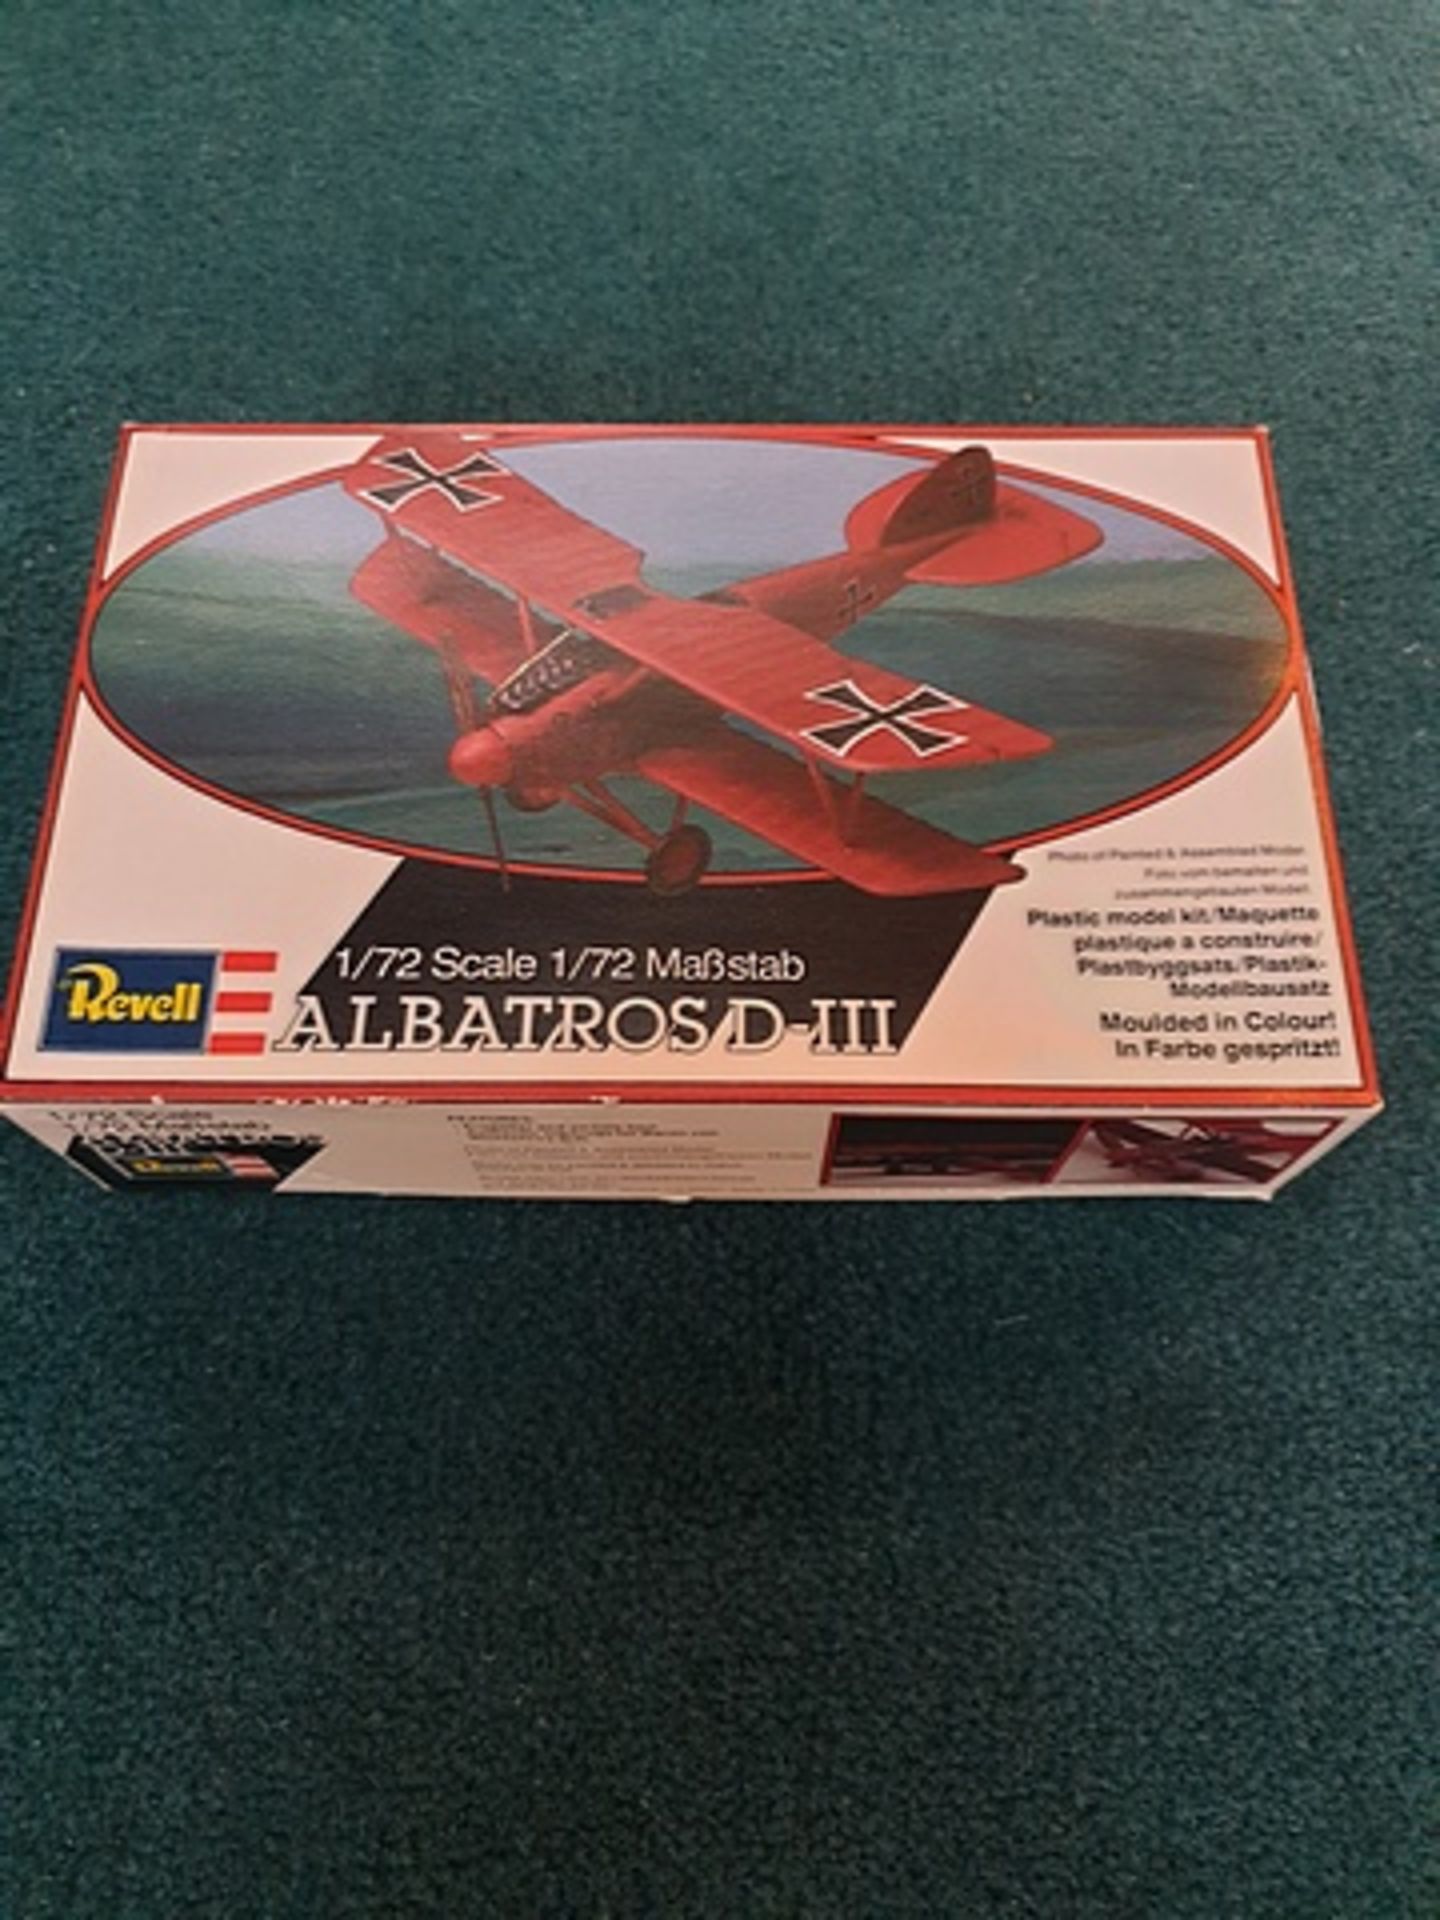 Revell scale 1/72 model 4110 Albatros D-III model airplane kit released 1980 complete in box